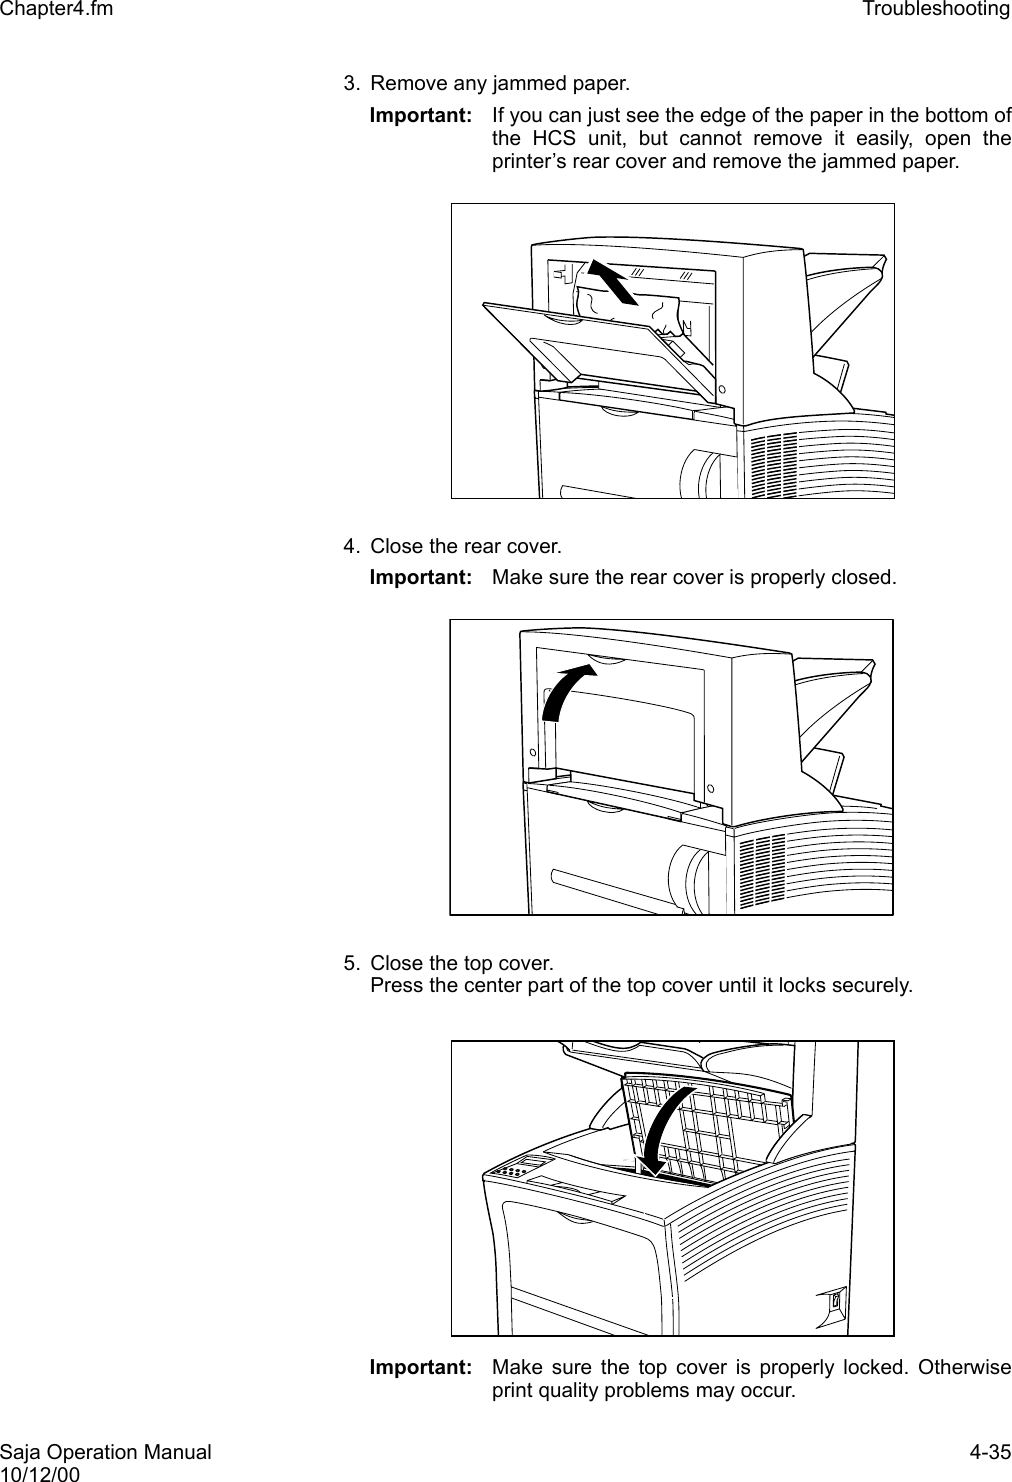 Saja Operation Manual 4-3510/12/00Chapter4.fm Troubleshooting 3. Remove any jammed paper. Important: If you can just see the edge of the paper in the bottom ofthe HCS unit, but cannot remove it easily, open theprinter’s rear cover and remove the jammed paper.4. Close the rear cover. Important: Make sure the rear cover is properly closed.5. Close the top cover.Press the center part of the top cover until it locks securely.Important: Make sure the top cover is properly locked. Otherwiseprint quality problems may occur. 